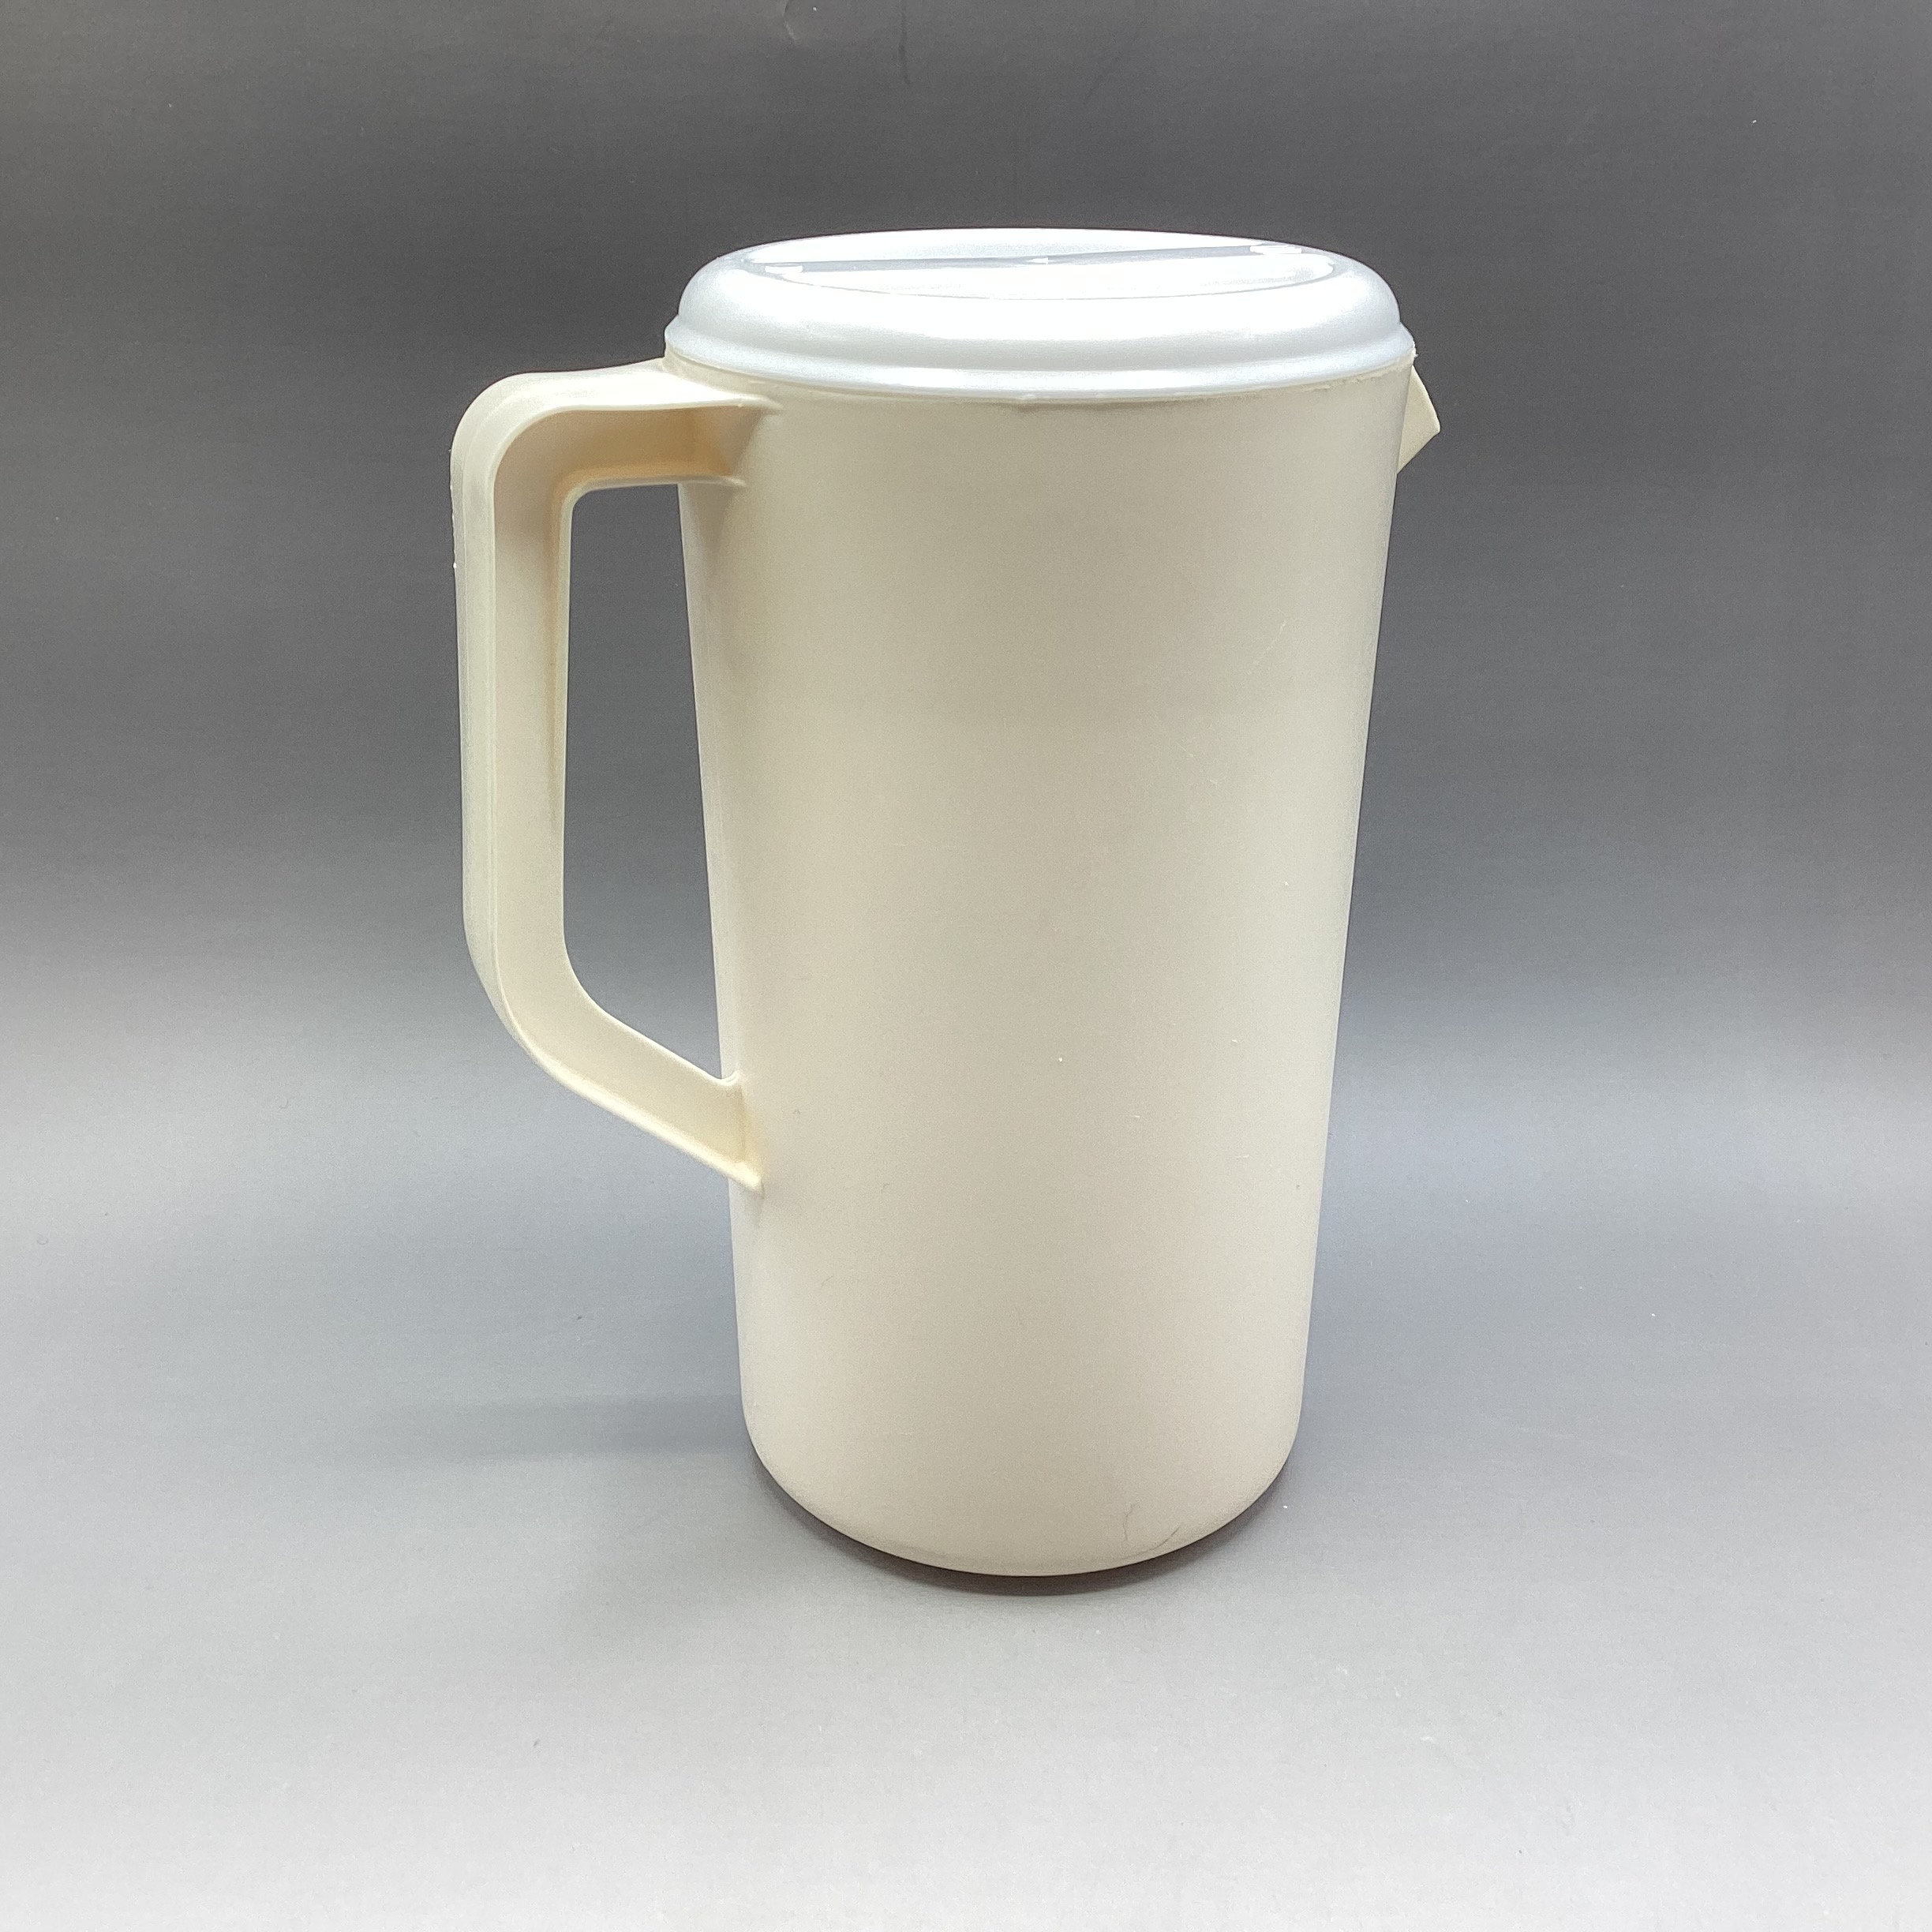 Rubbermaid 2678 Yellow Ribbed 2 Quart Pitcher with Lid ~ Vintage